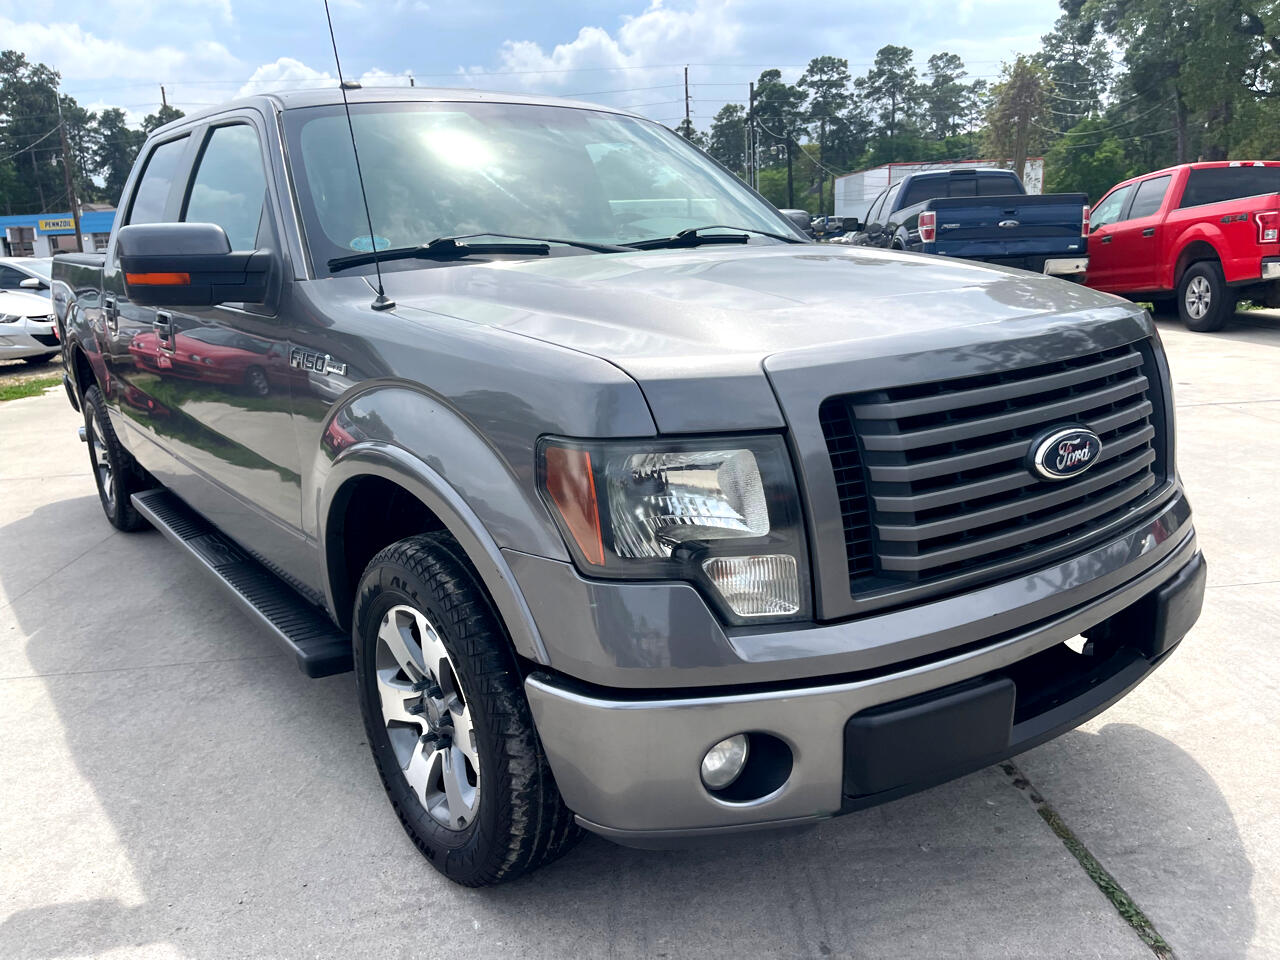 2012 Ford F-150 FX2